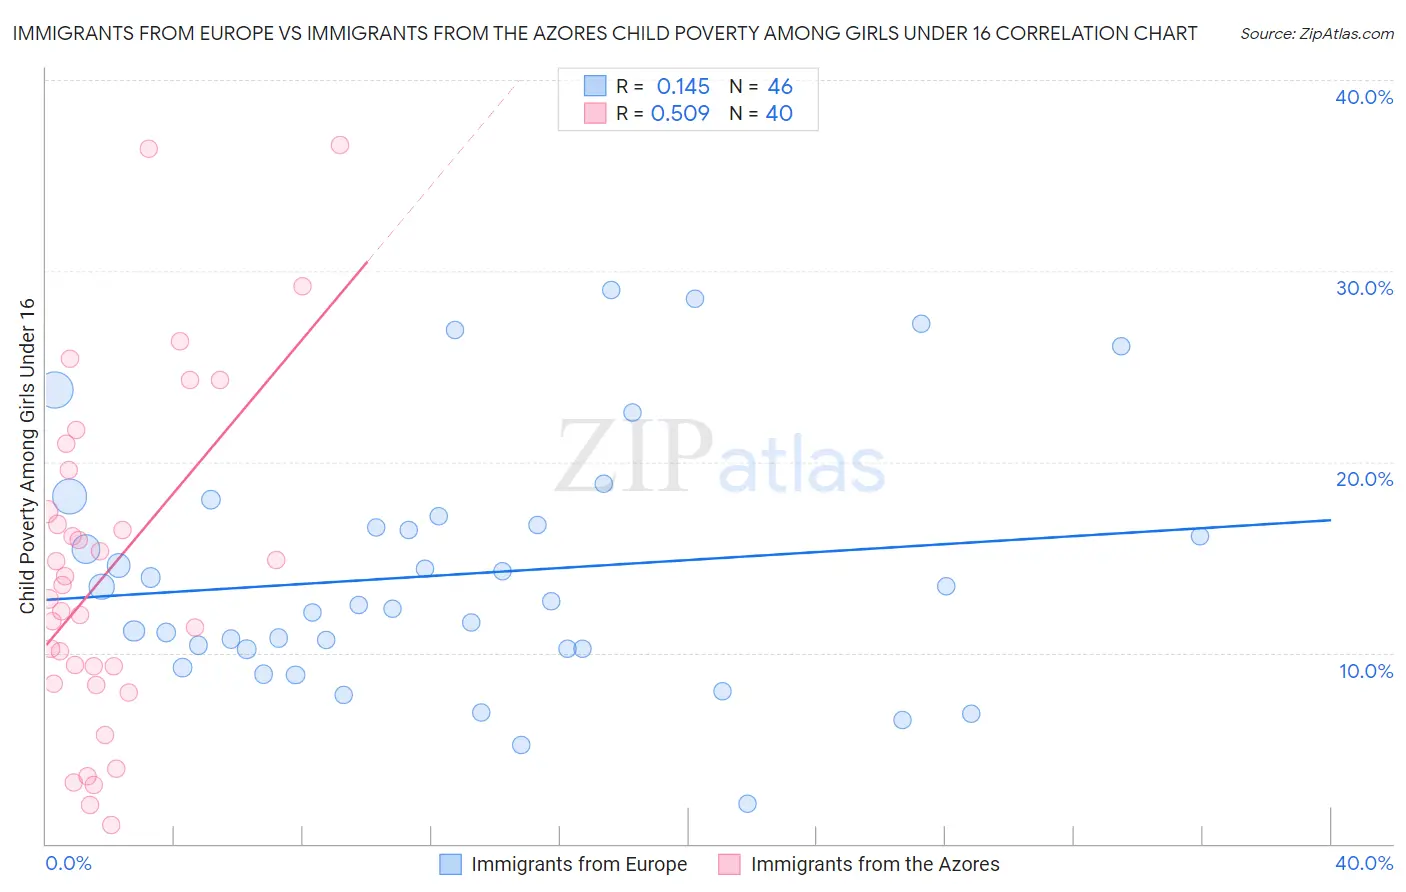 Immigrants from Europe vs Immigrants from the Azores Child Poverty Among Girls Under 16